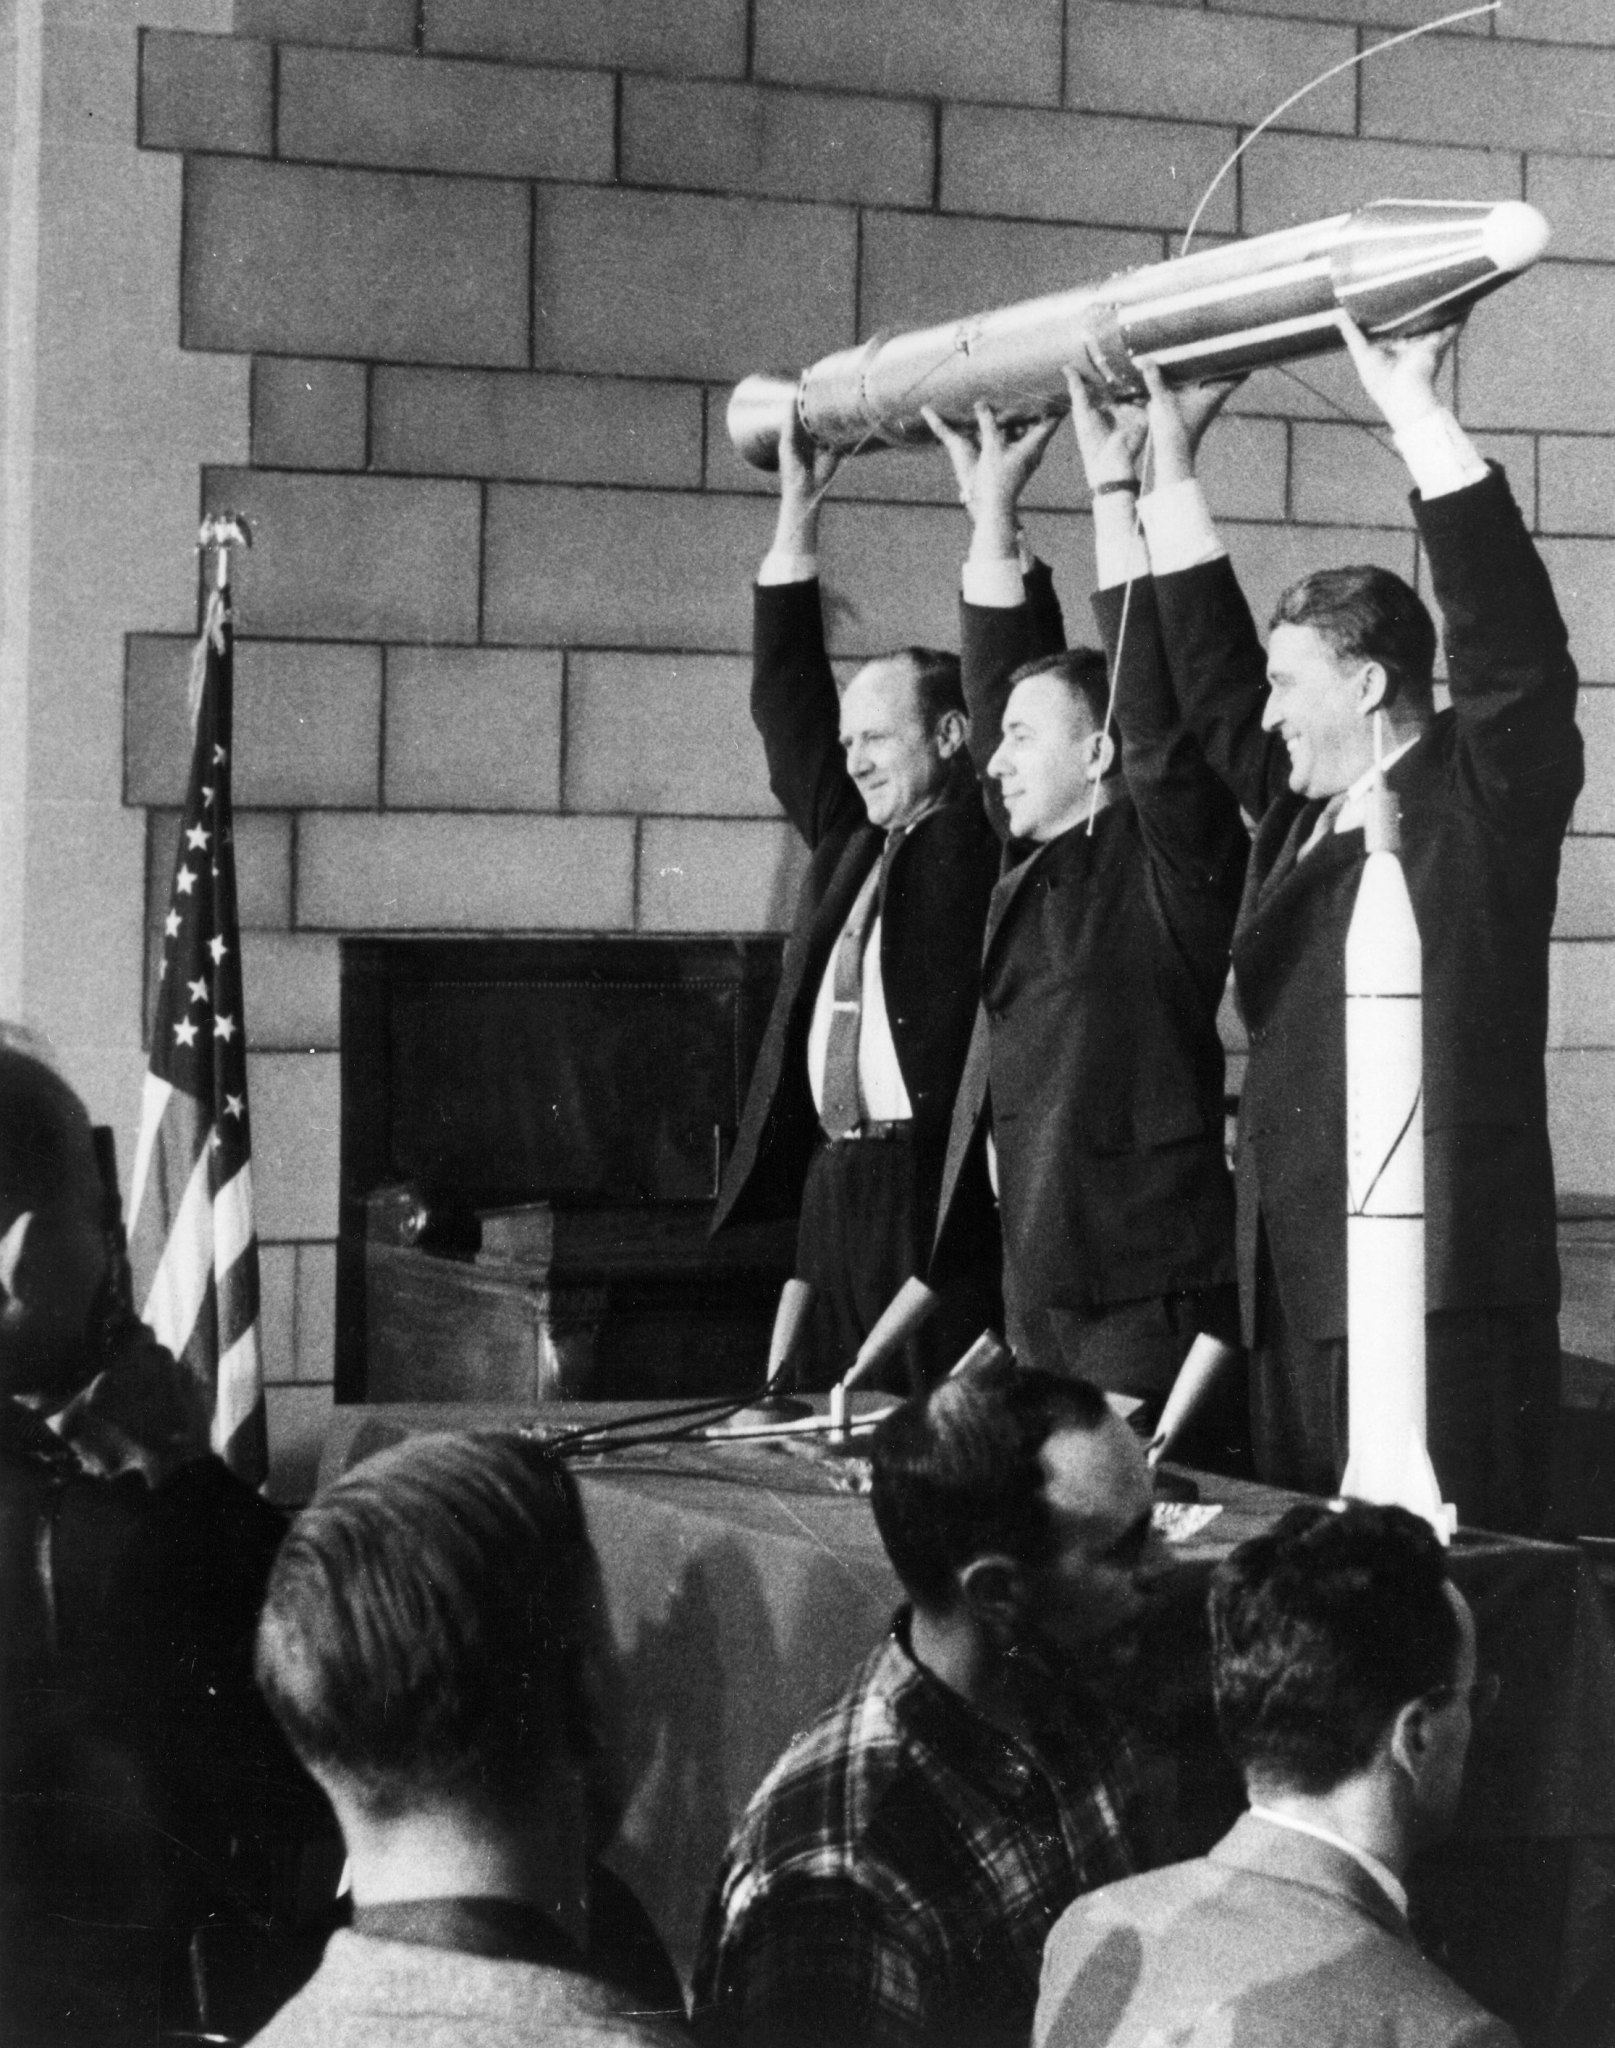 Van Allen holding a model of the Explorer I satellite in celebration after its successful orbiting: